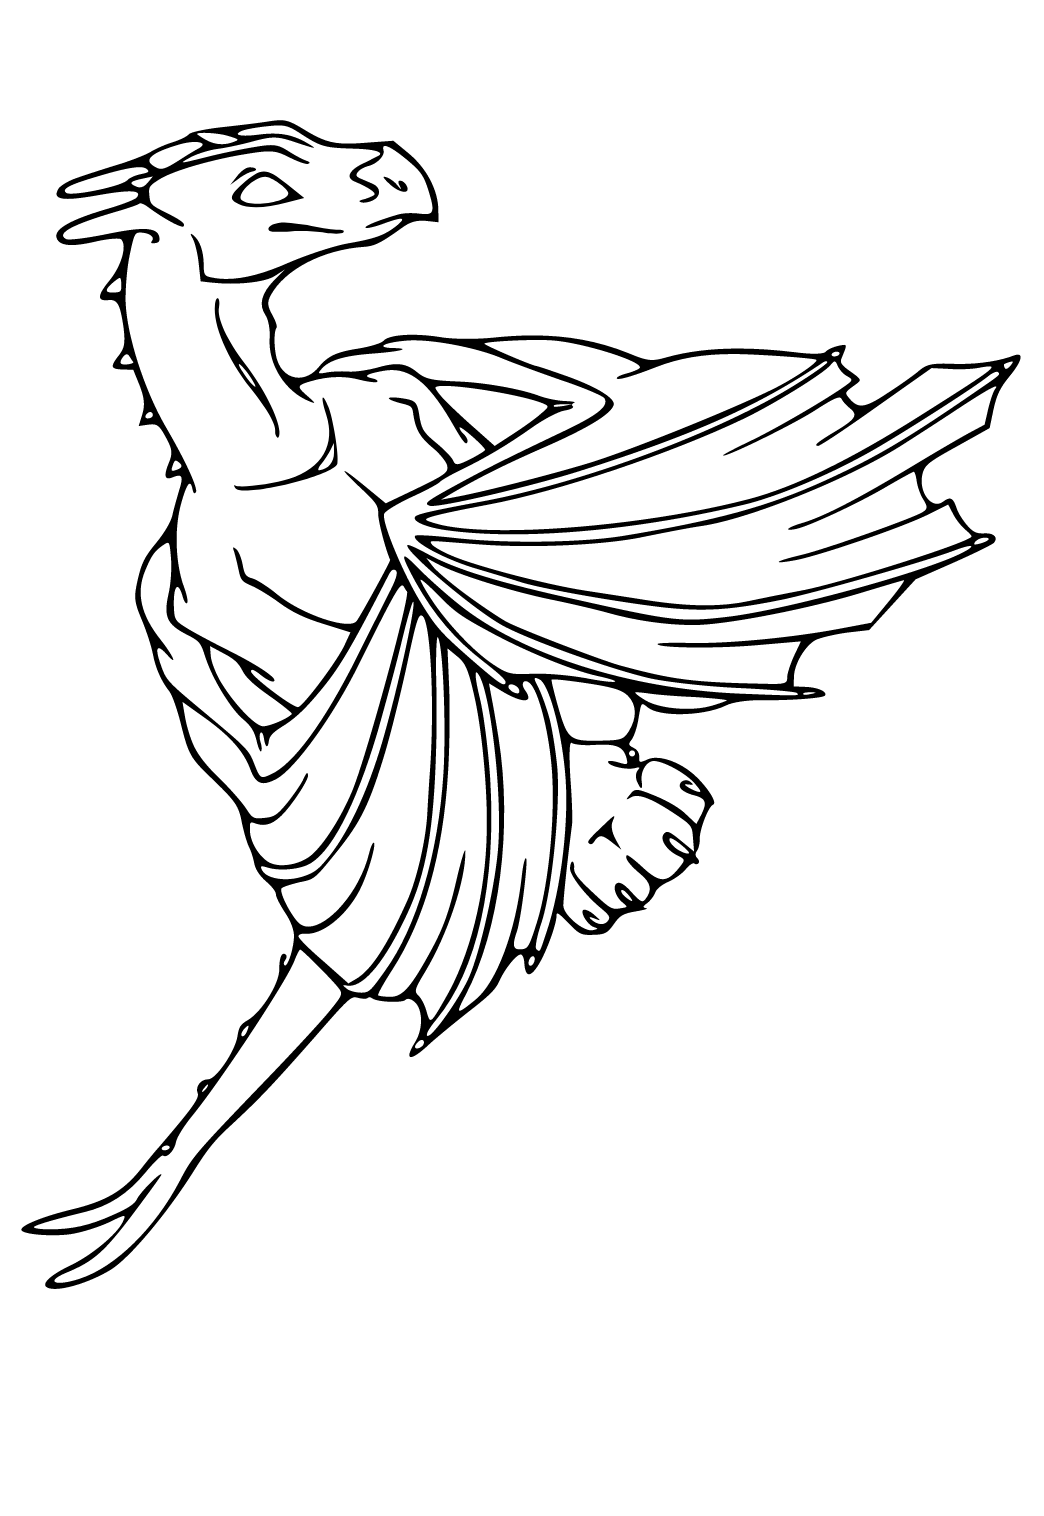 Free Printable Dragon Wings Coloring Page for Adults and Kids - Lystok.com